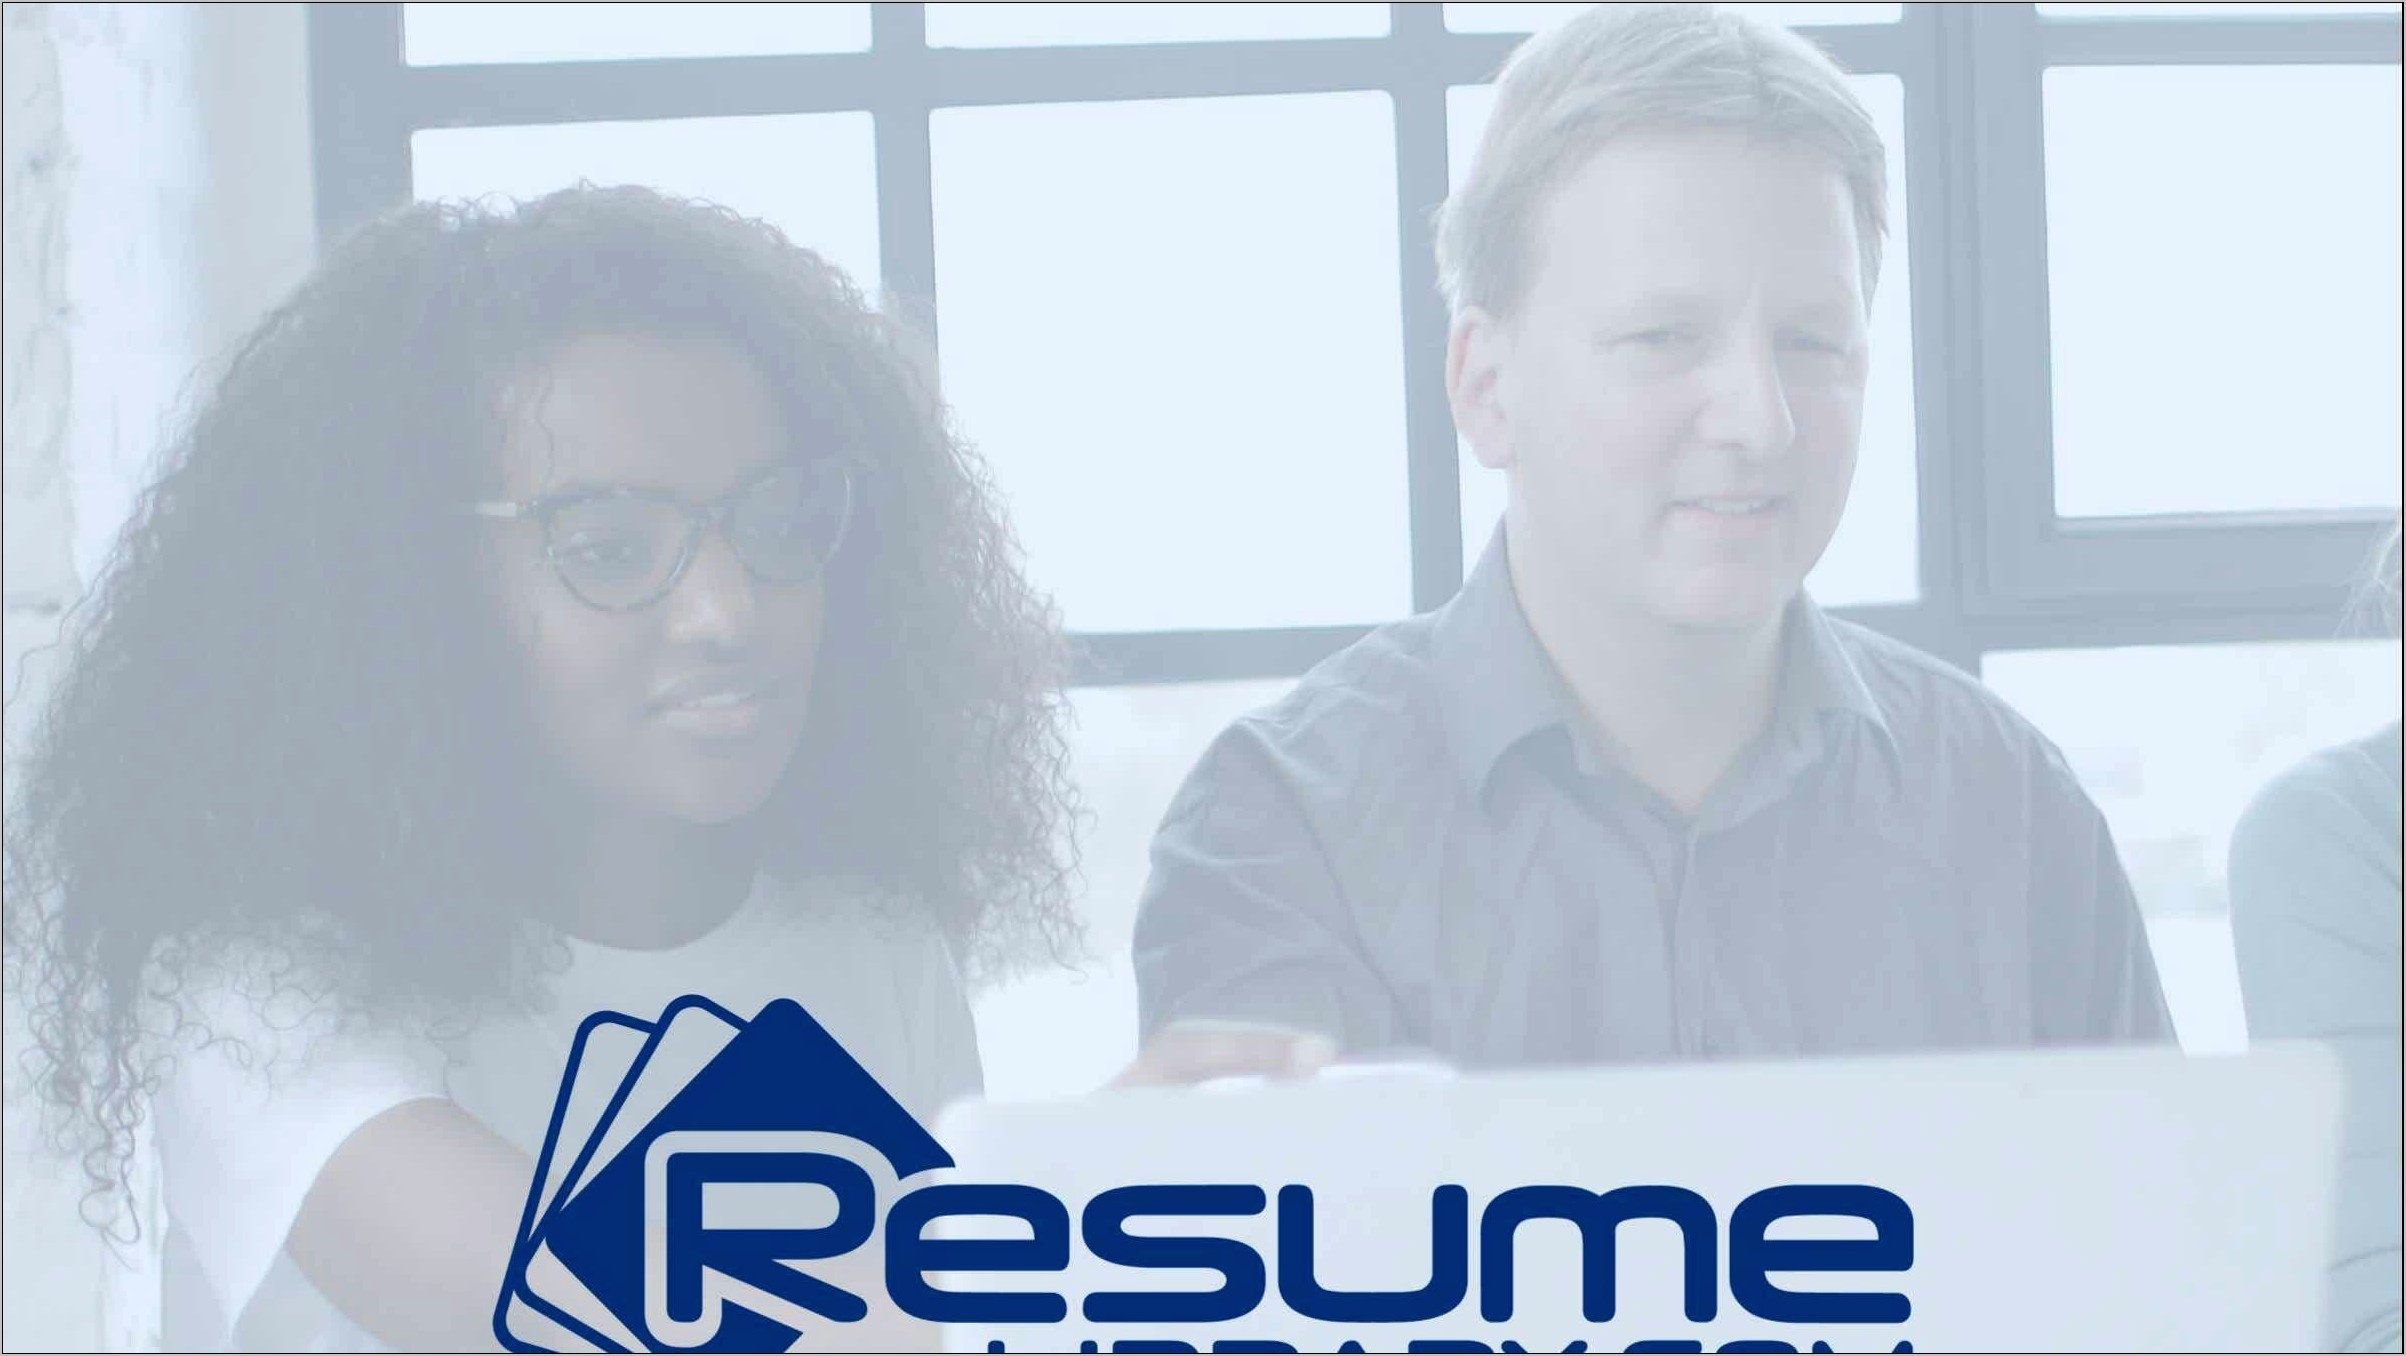 Free Resume Review Library Illinois